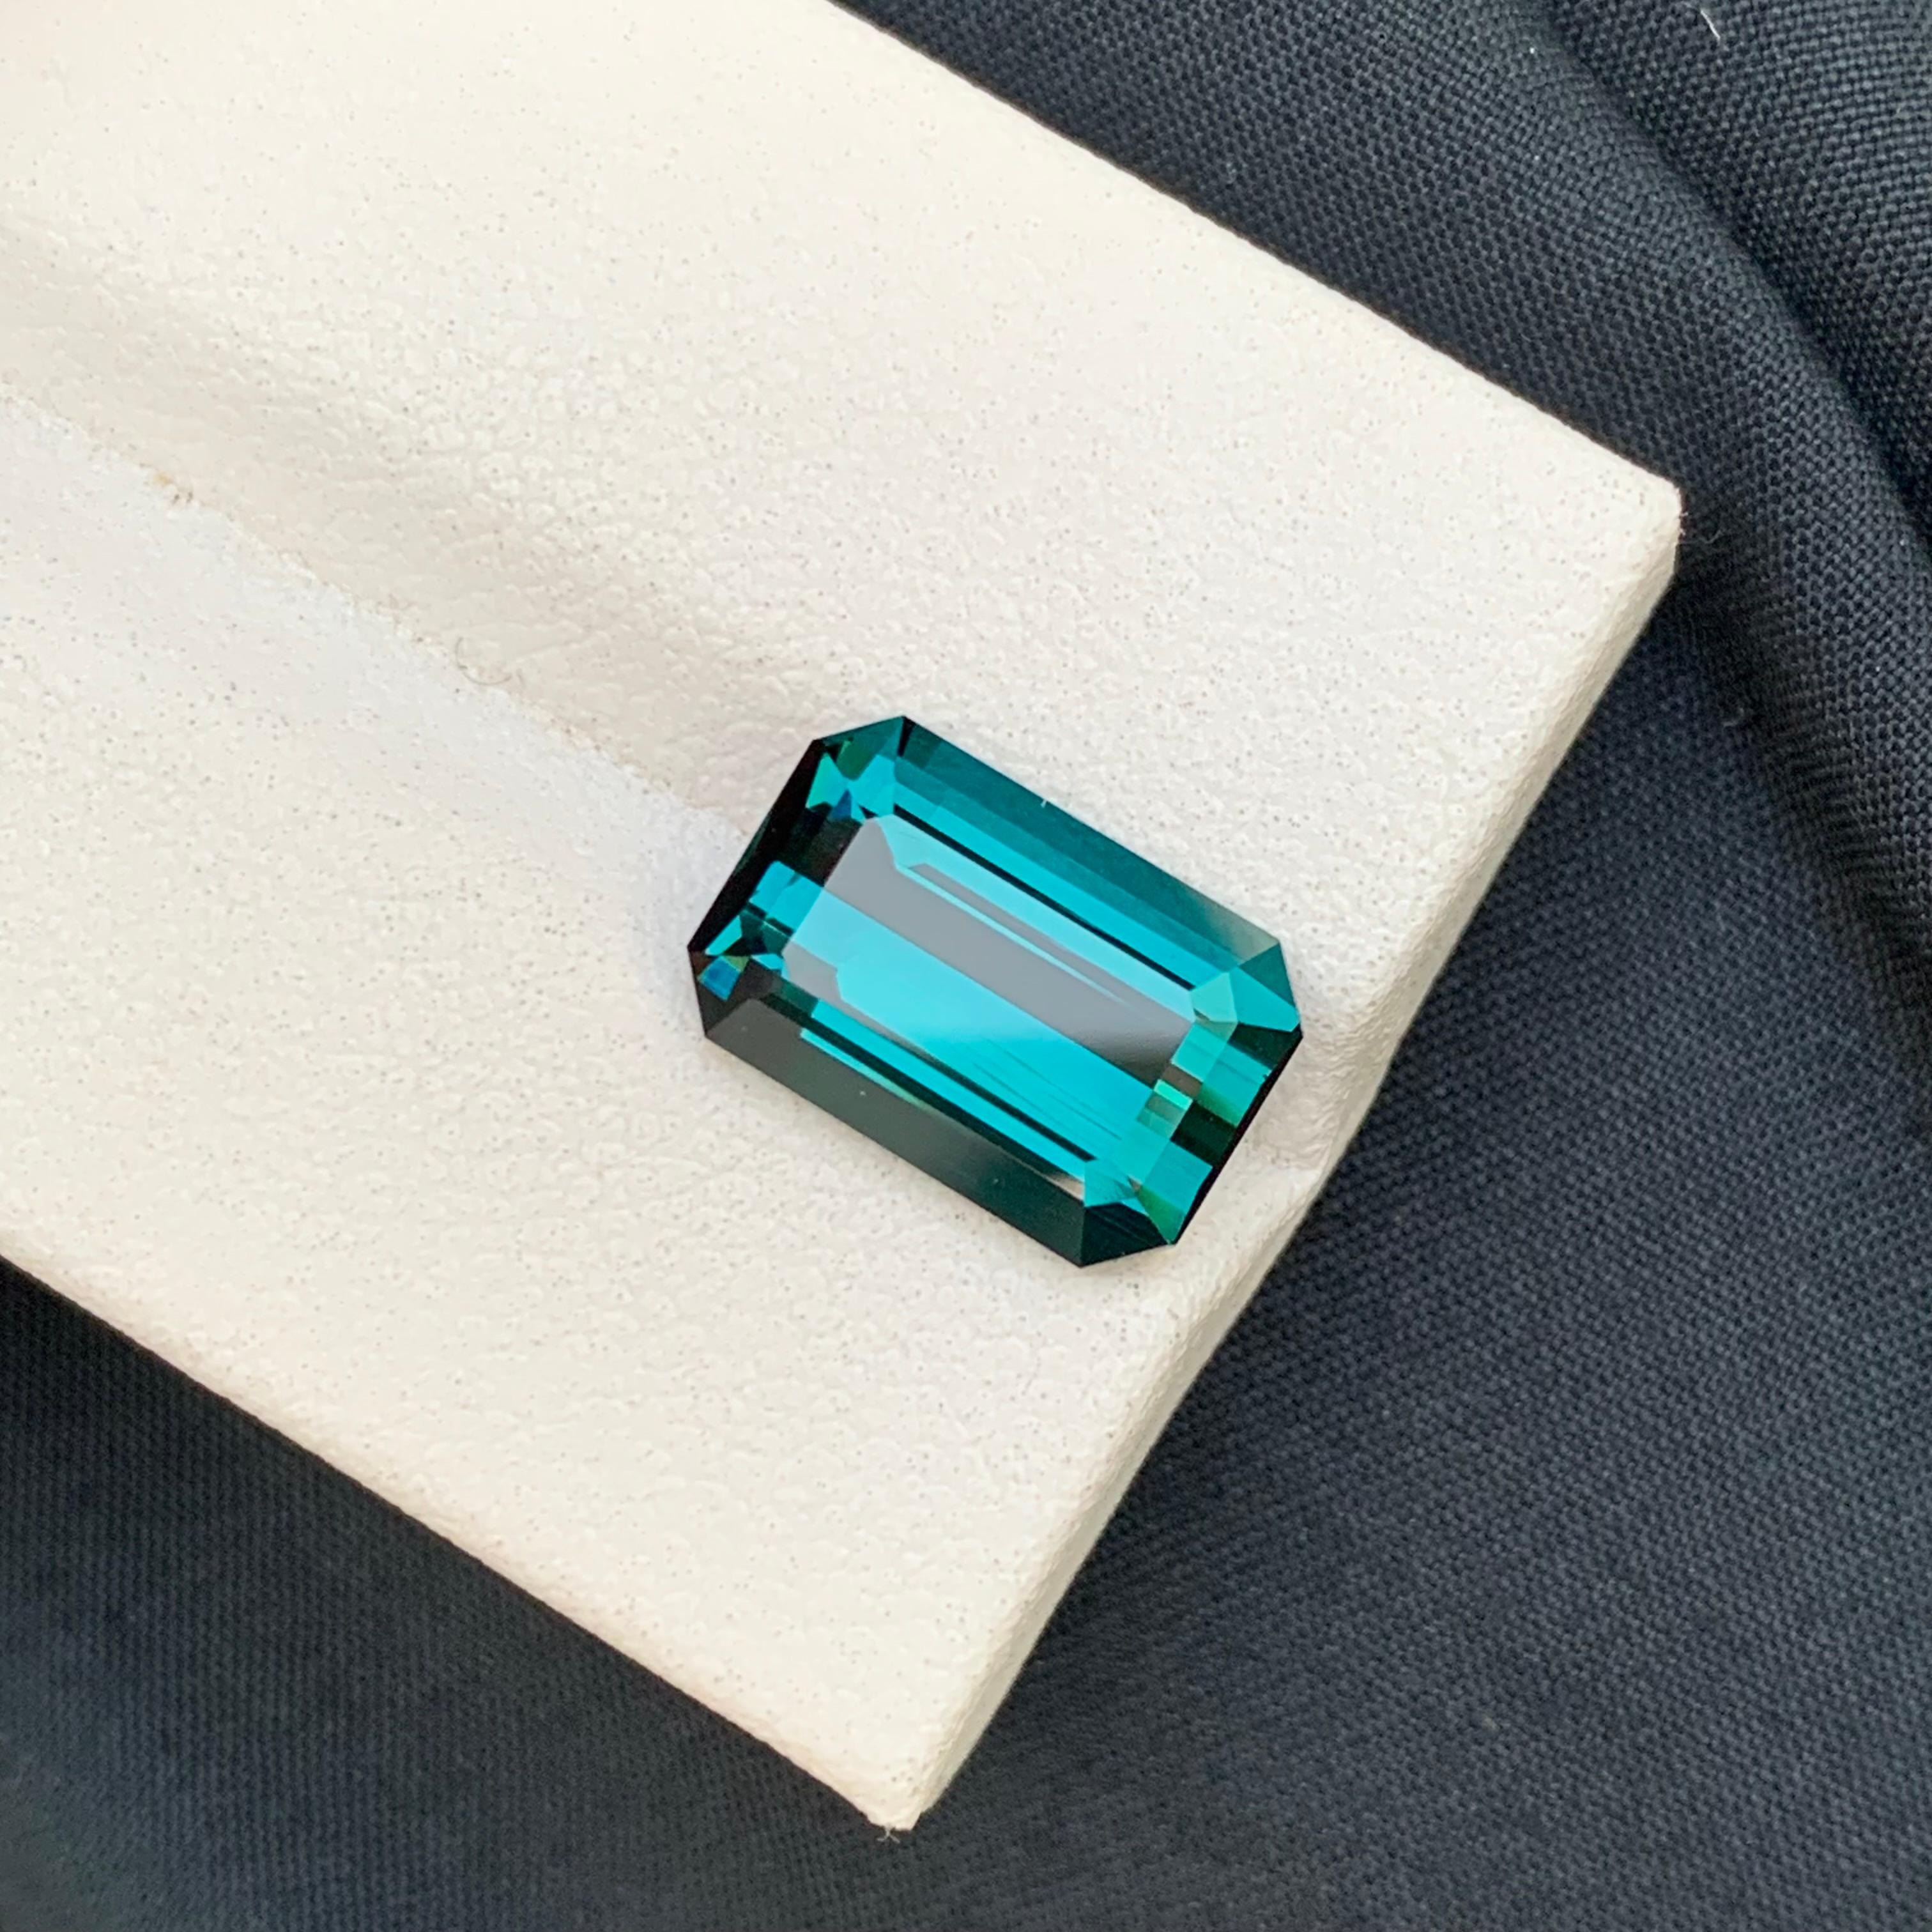 Top AAA Quality Natural Loose Indicolite Tourmaline 4.45 Carats Ring Gem For Sale 3